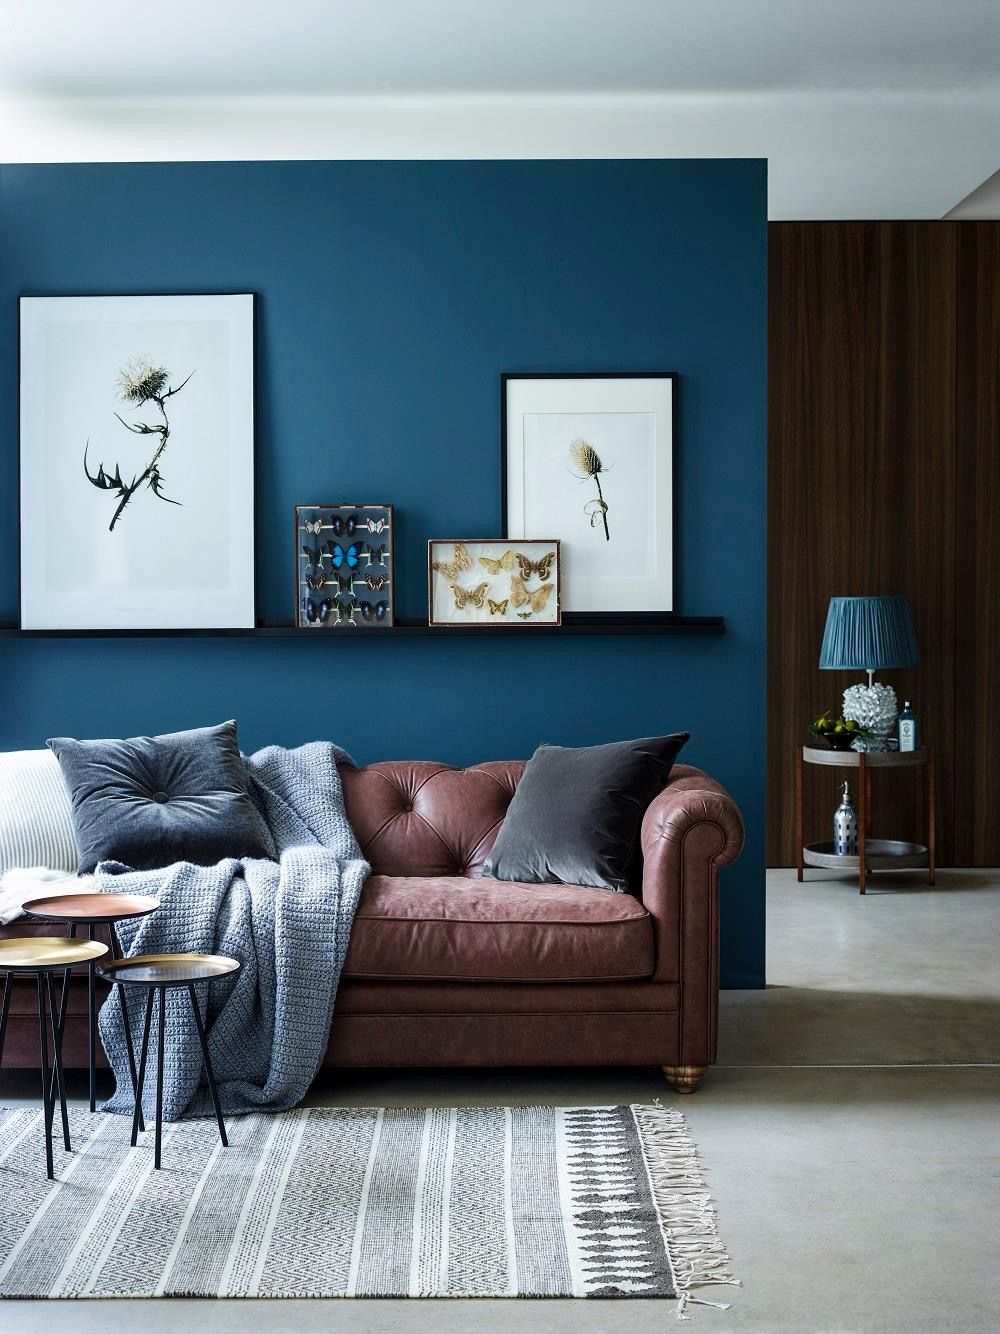 Relaxing living room in blue-green and brown